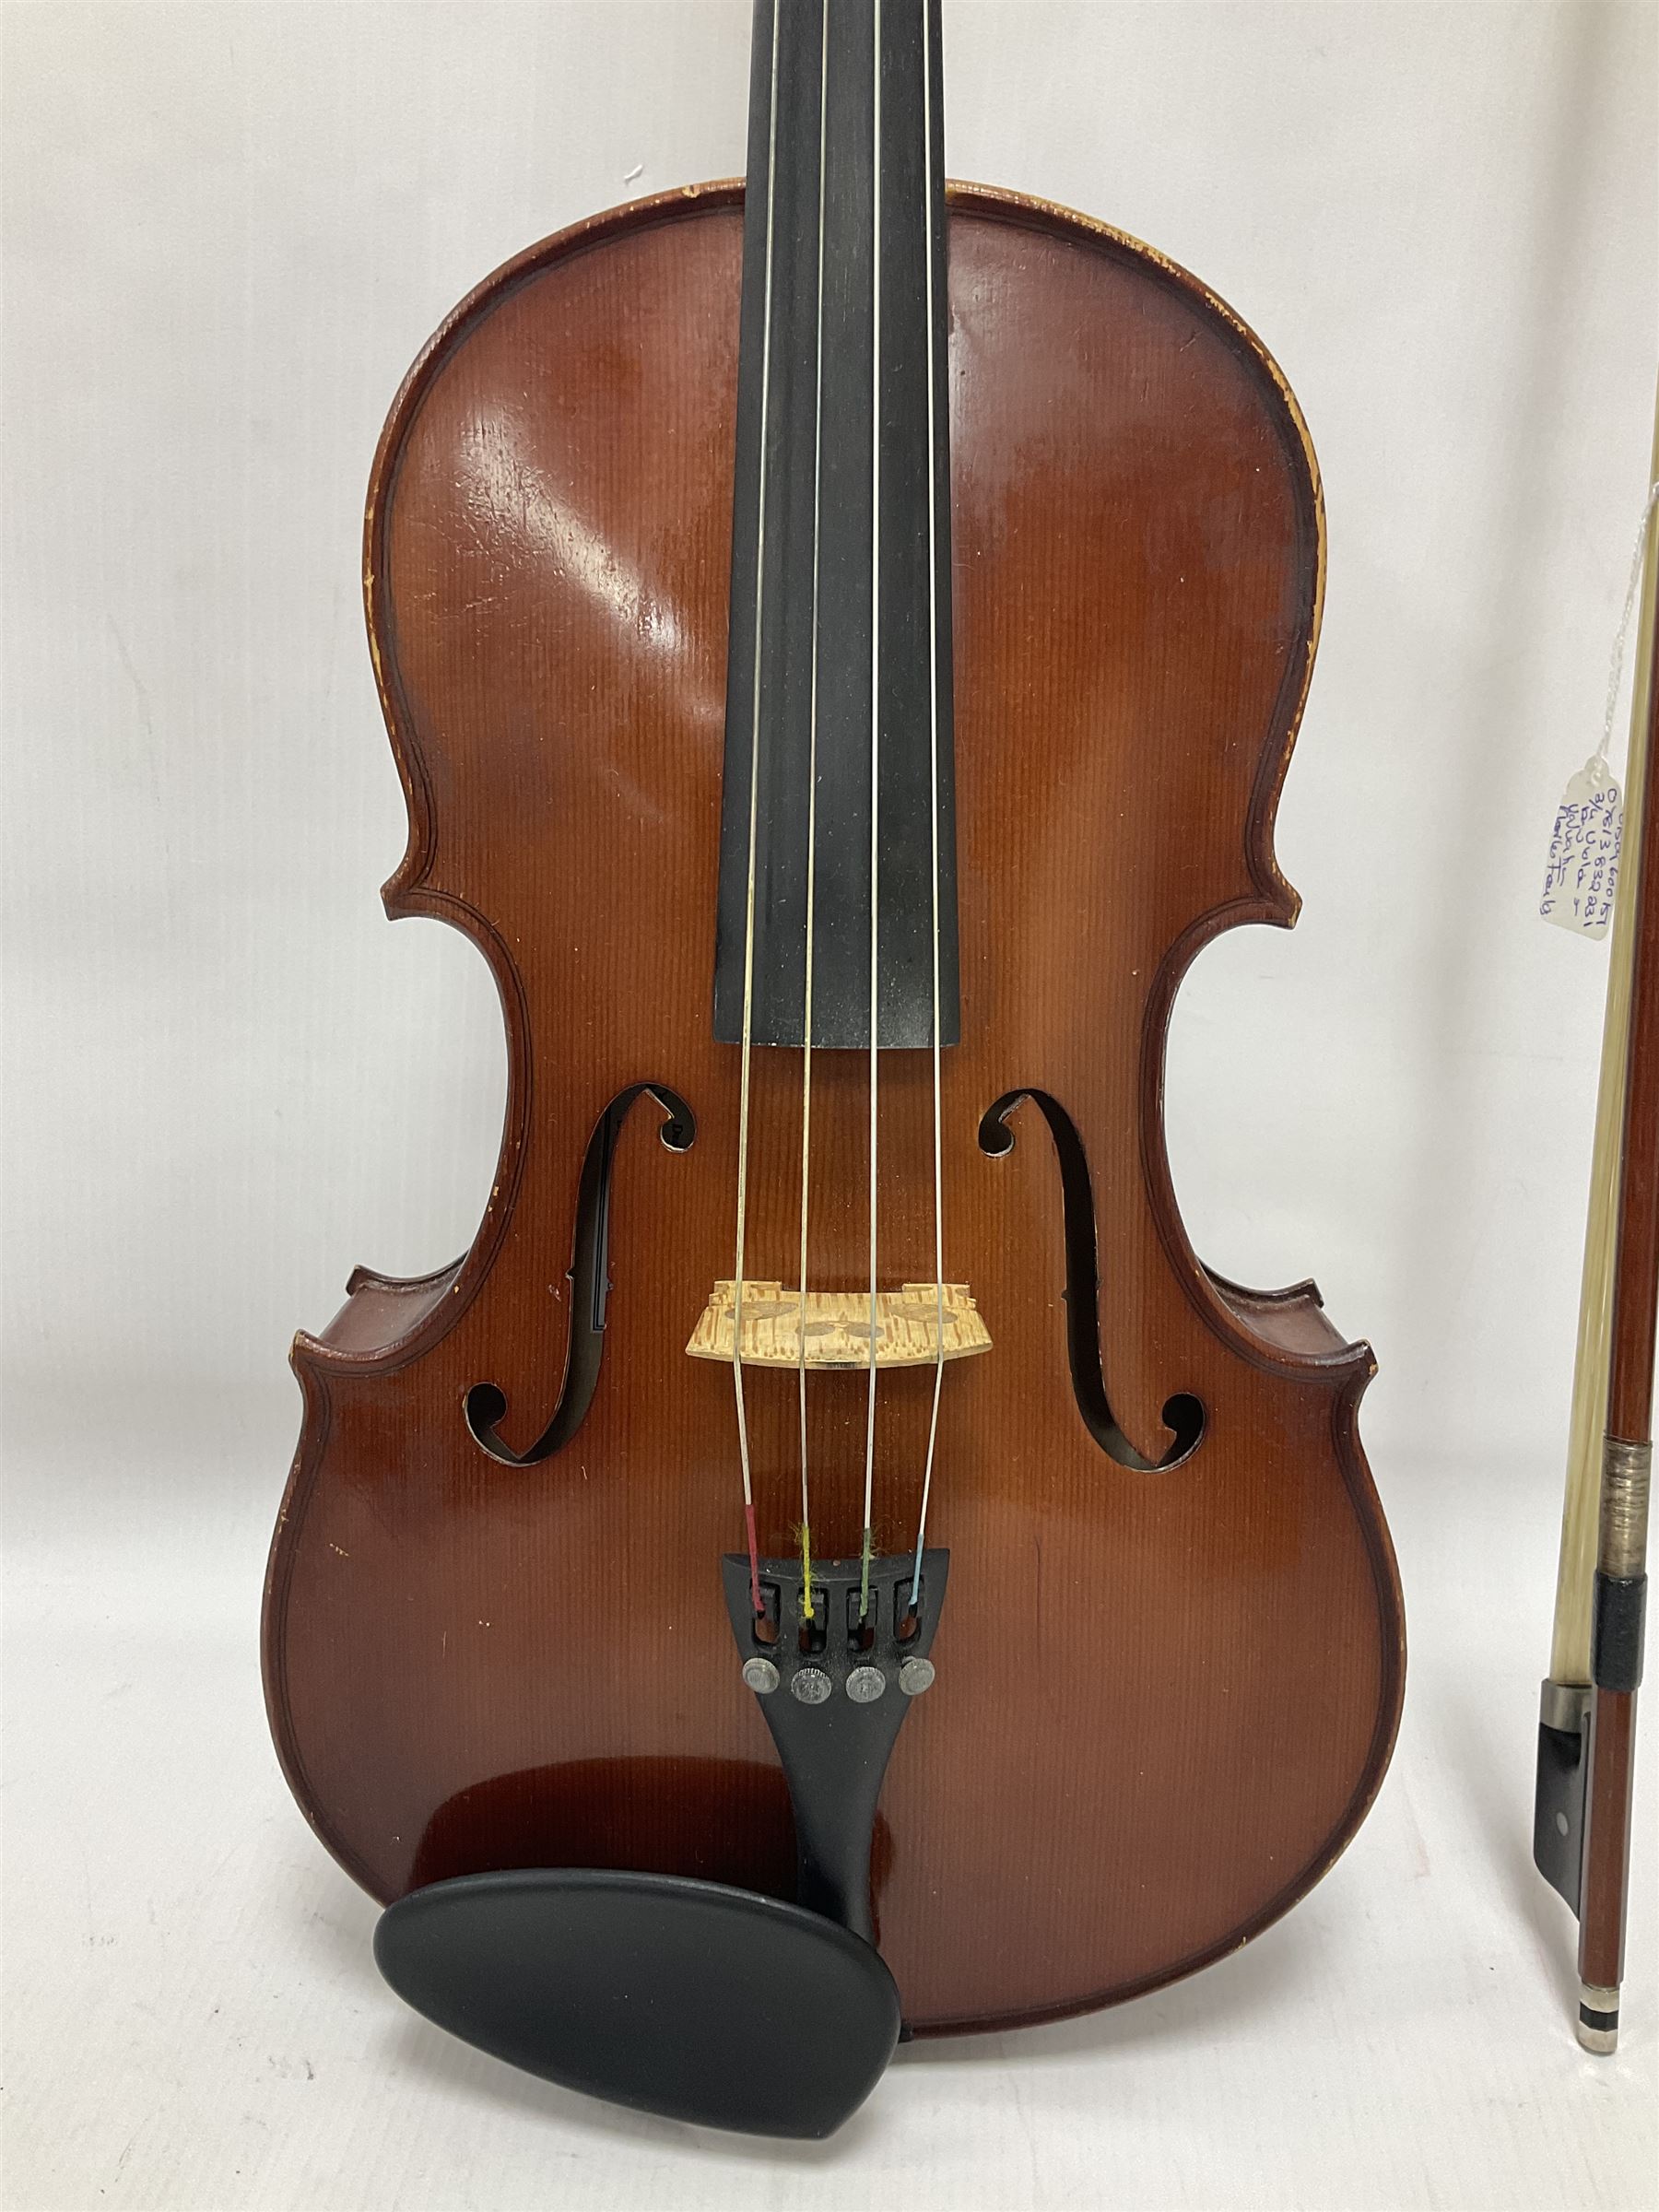 Small 20th century viola copy of a Tertis with a maple back and ribs and spruce top in a hard case w - Image 3 of 20